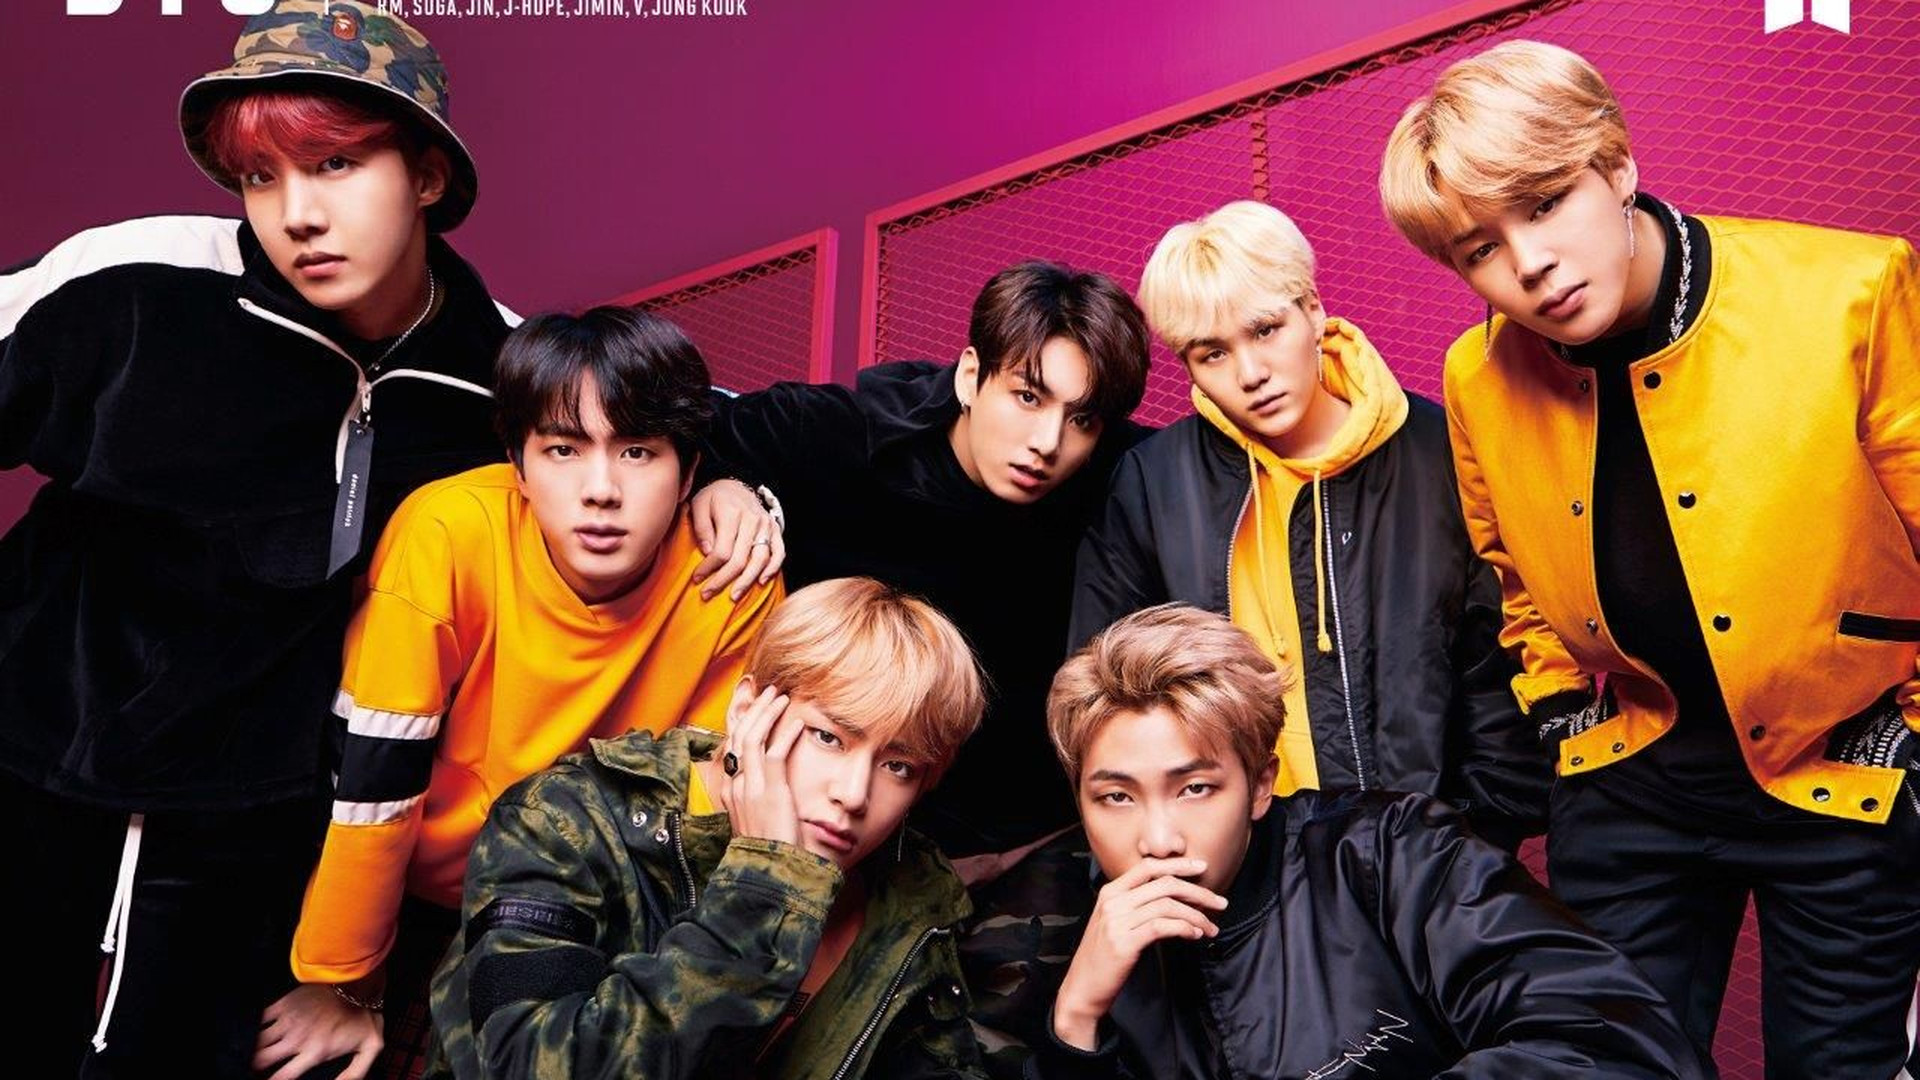 Bts Photos Wallpaper For Laptop - IMAGESEE